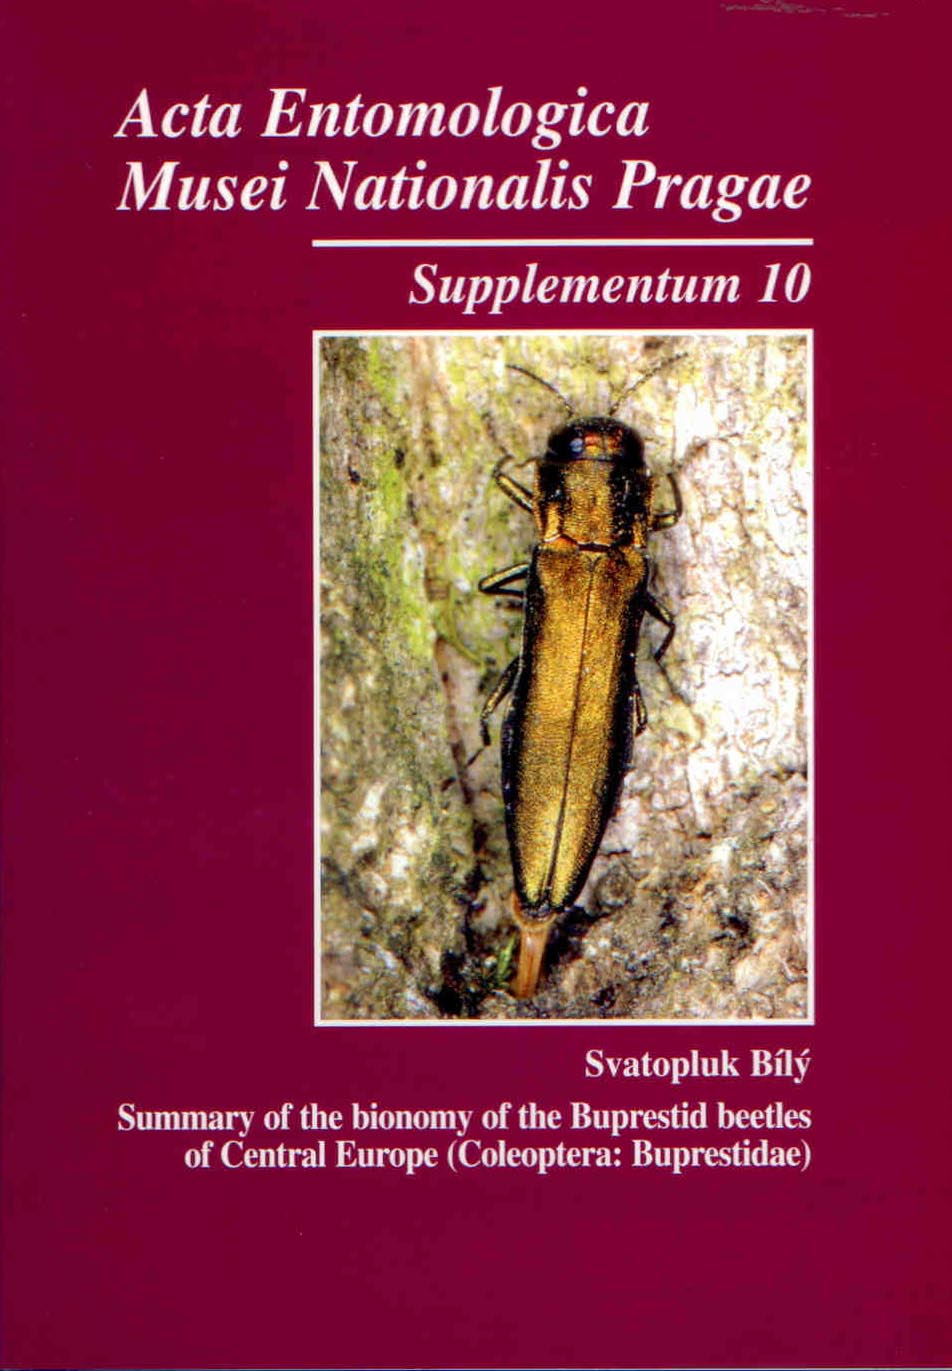 Bily, S. - Summary of the Bionomy of the Buprestid Beetles of Central Europe (Coleoptera: Buprestidae)